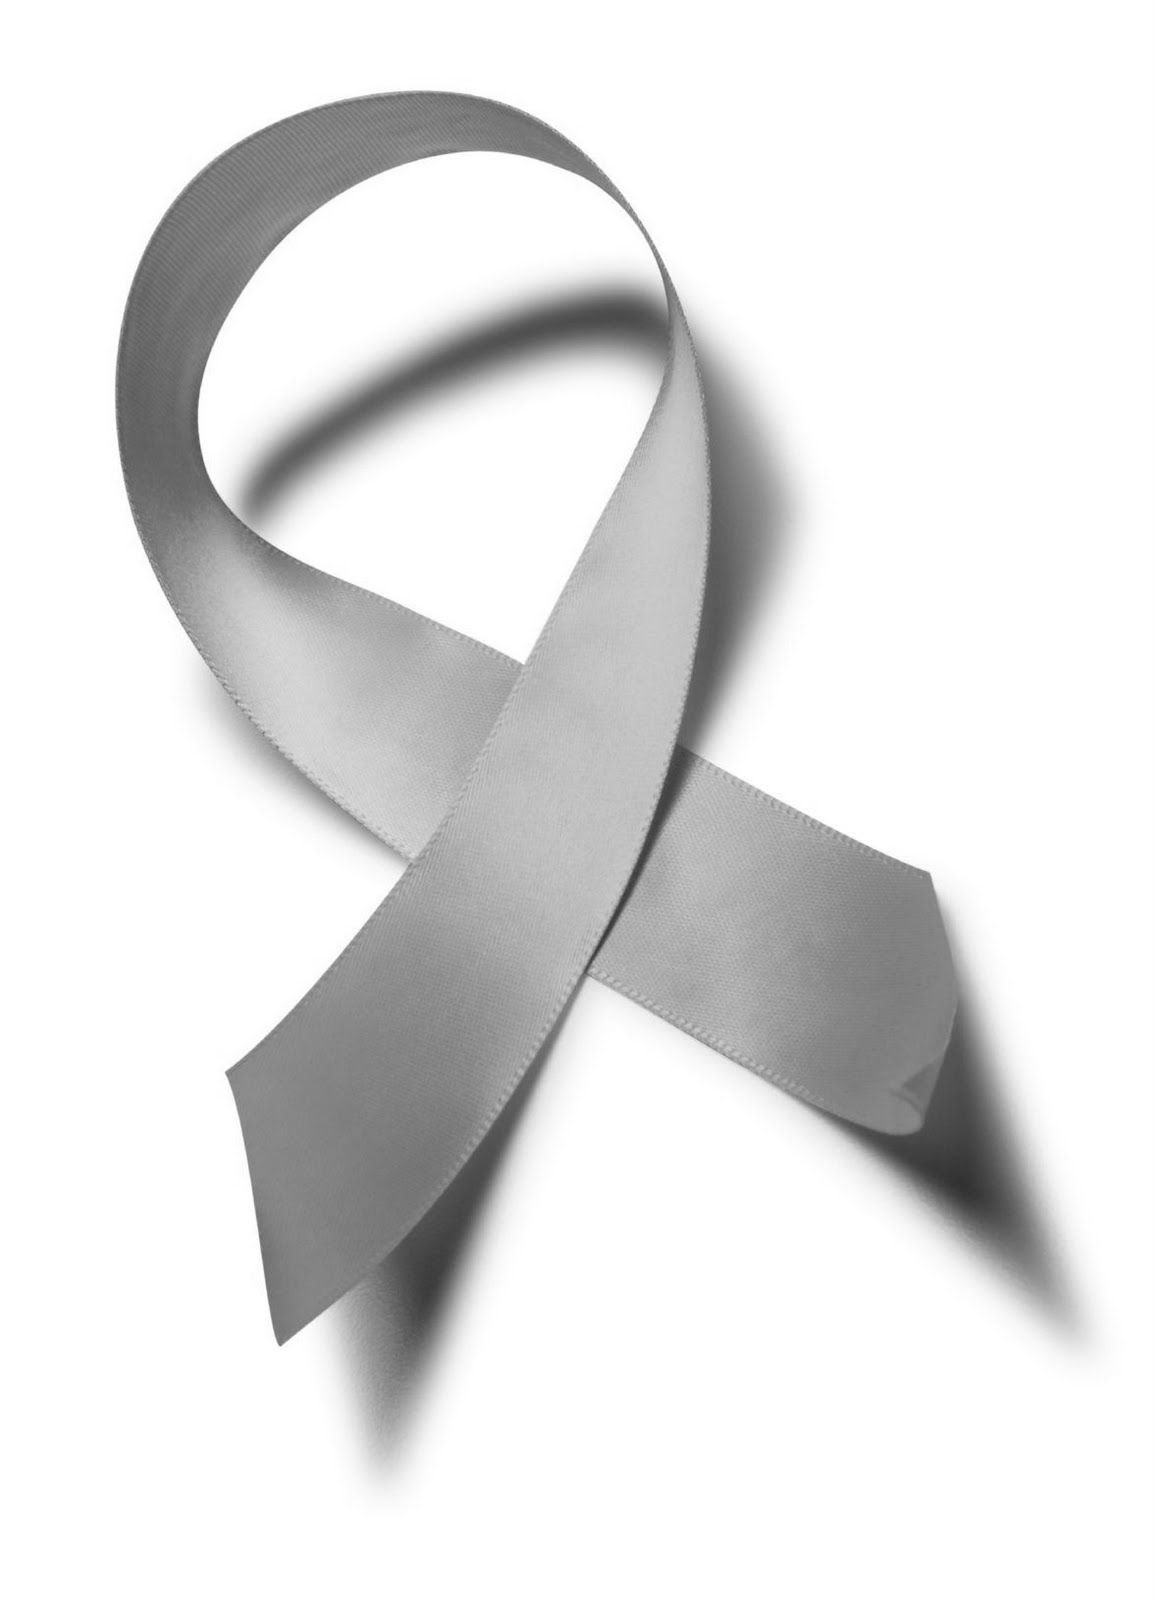 Cancer clipart brain cancer. This gray ribbon supports